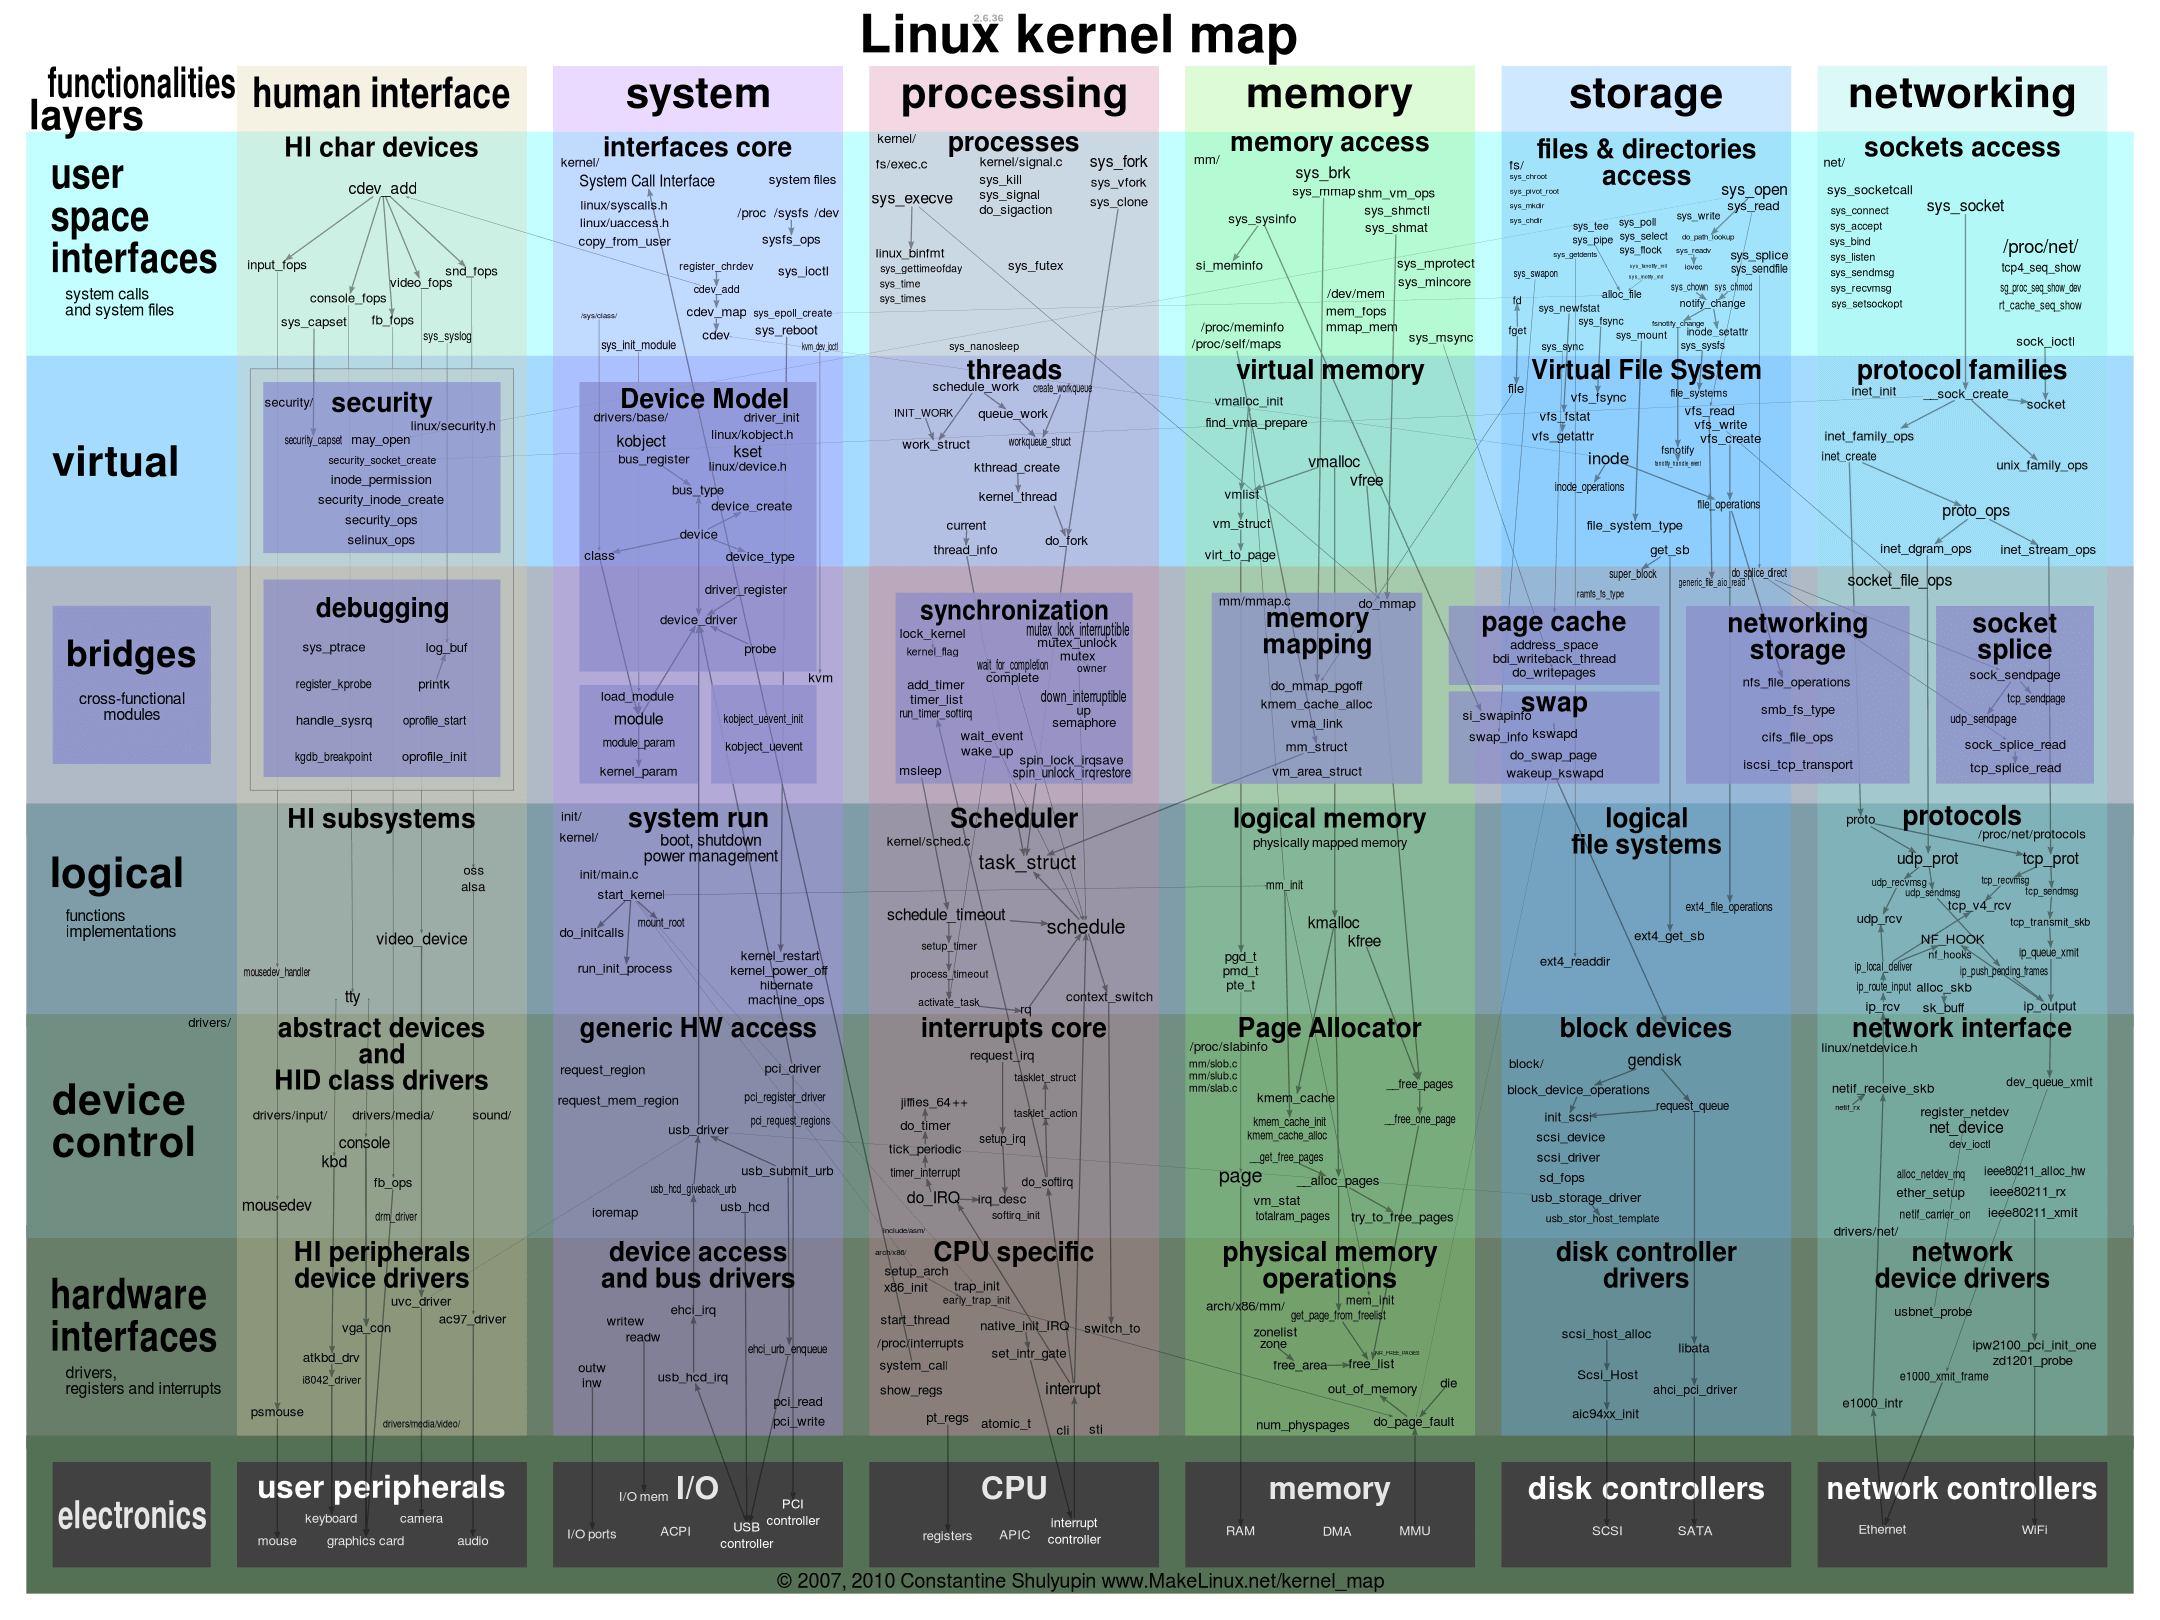 https://img.zhaoweiguo.com/knowledge/images/cores/oses/linux1.png